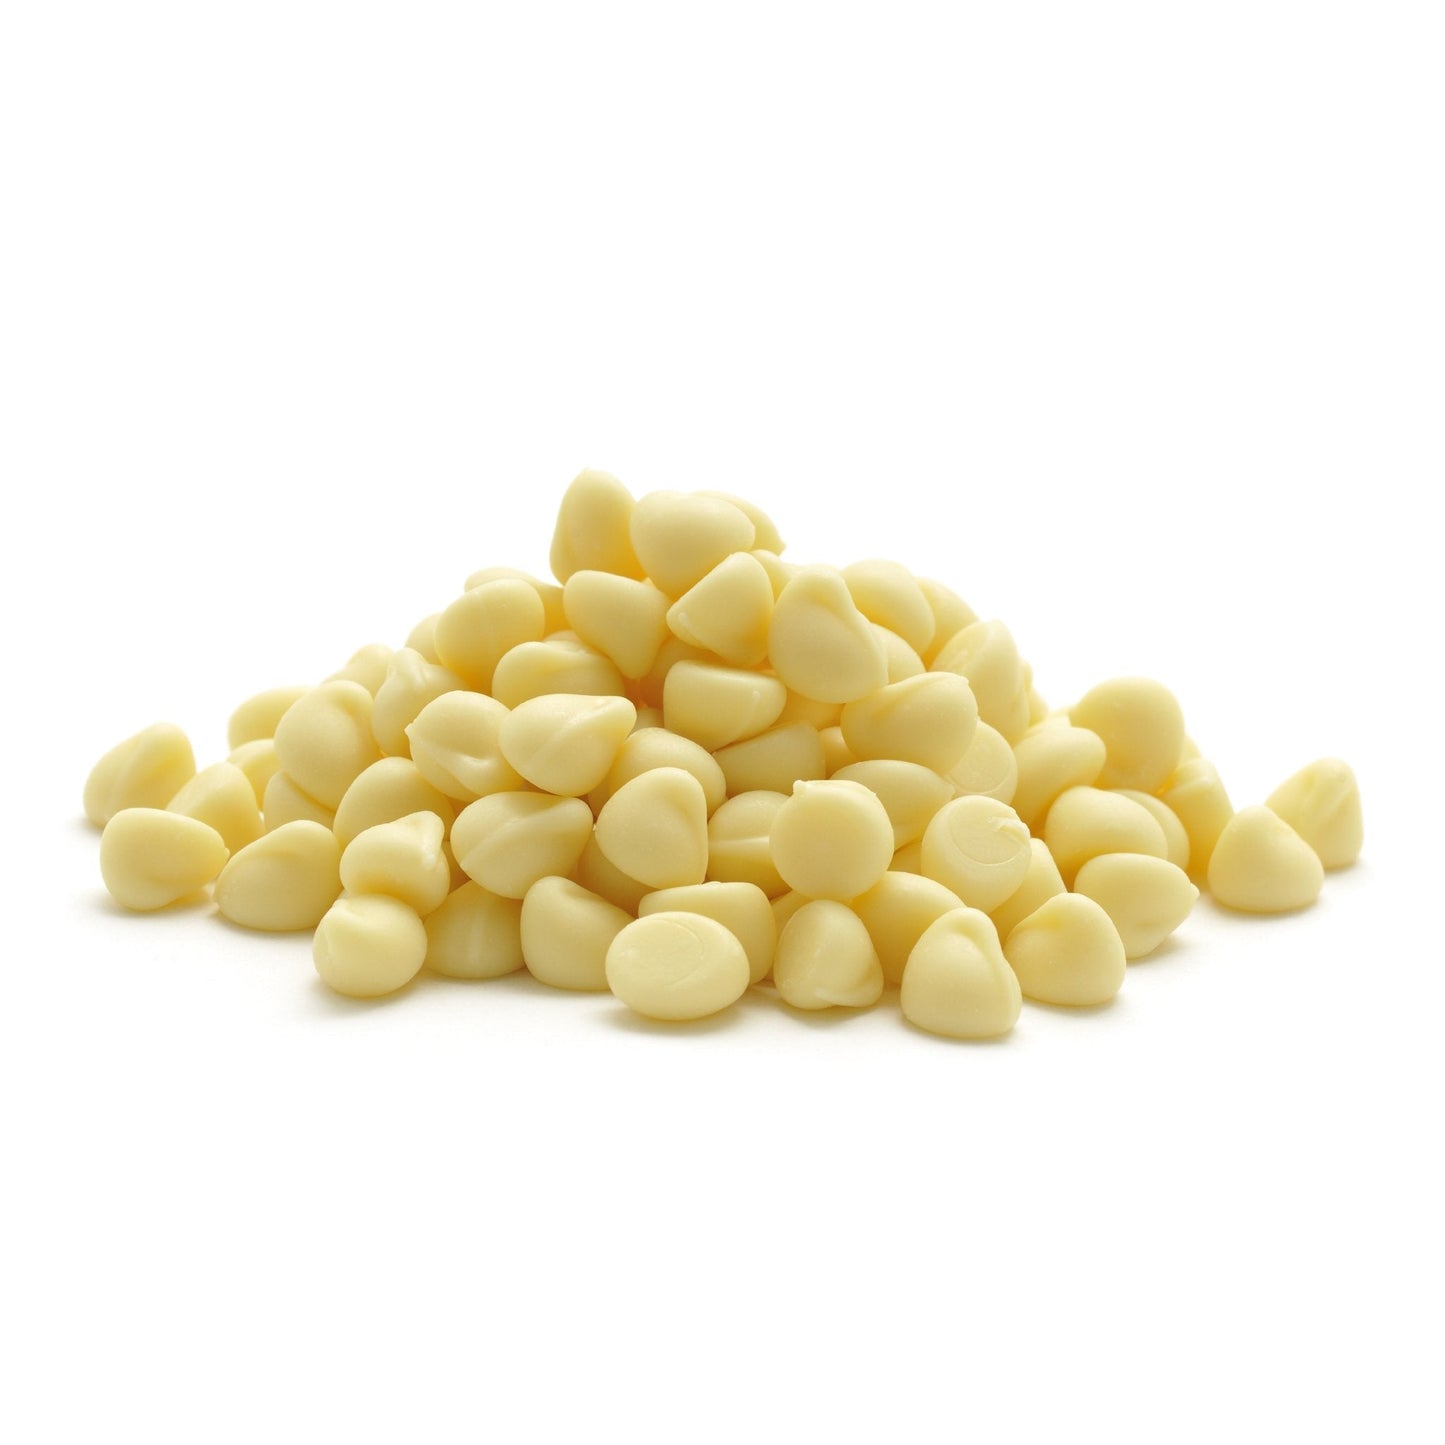 Mini Non-Dairy White Chocolate Chips Parve 22lbs